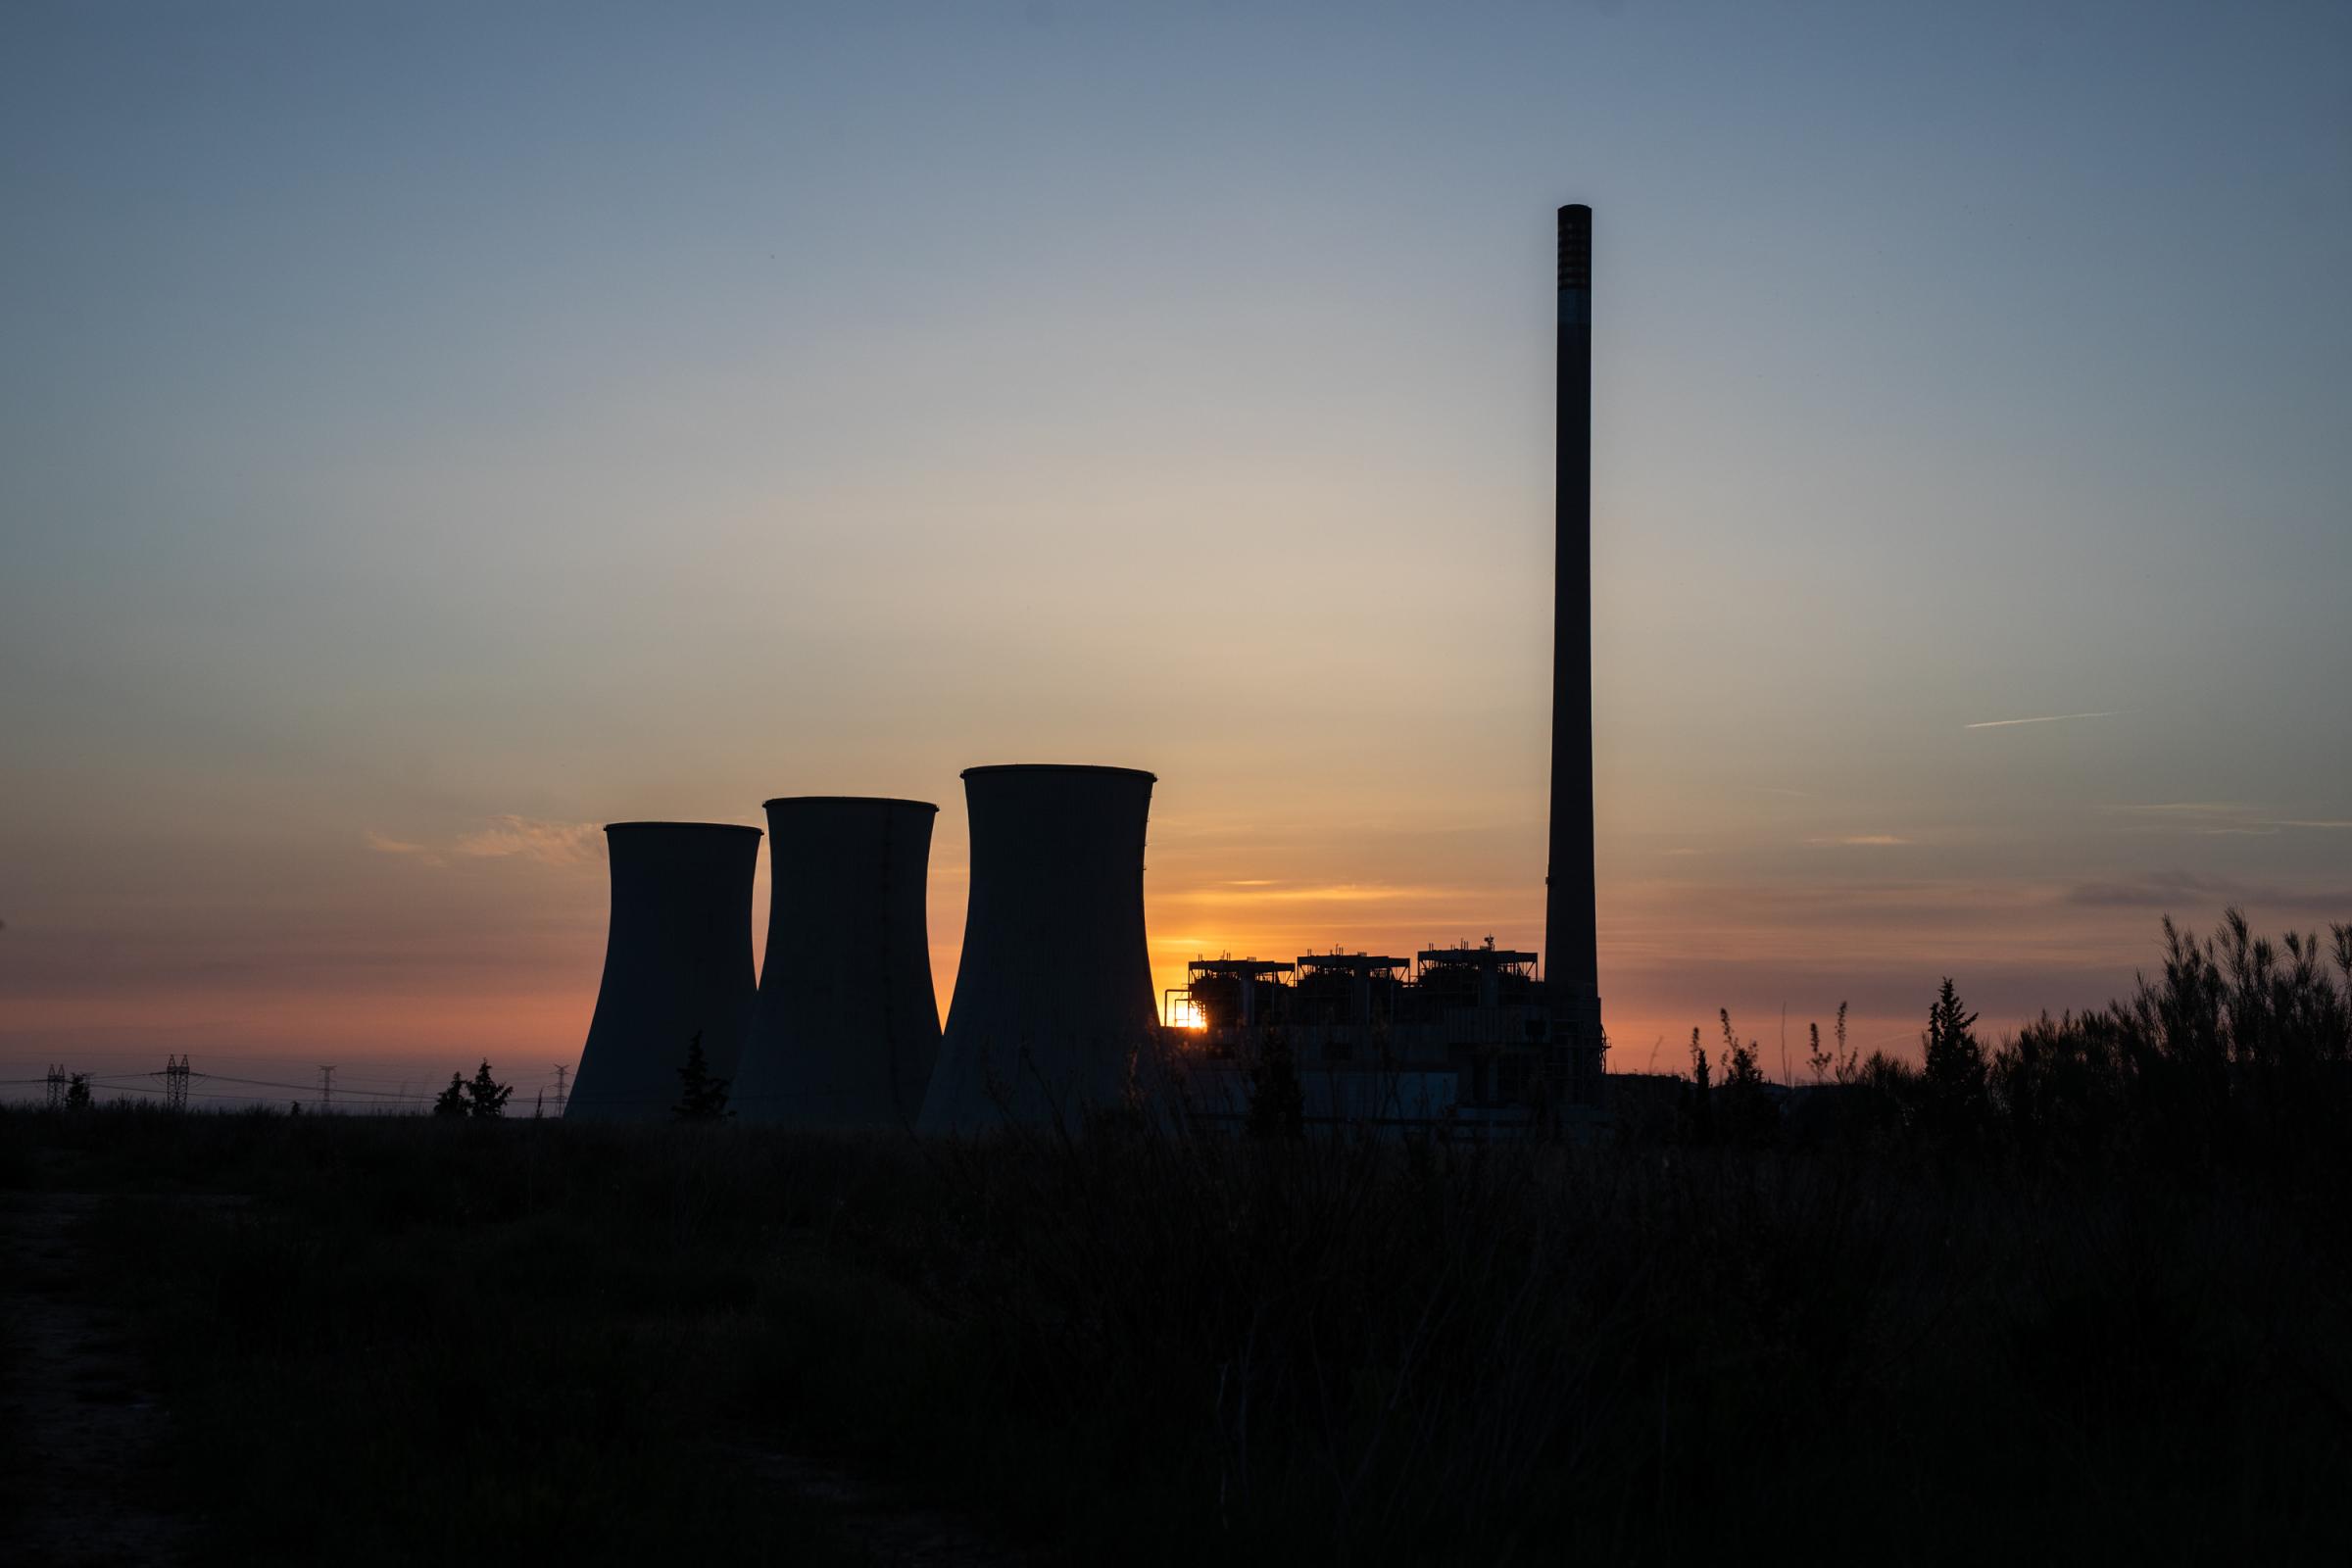 ANDORRA, SPAIN - MAY 13: Sunrise at the thermal power plant on 13 May 2022 in Andorra, Teruel, Spain. The three identical towers of the Teruel...